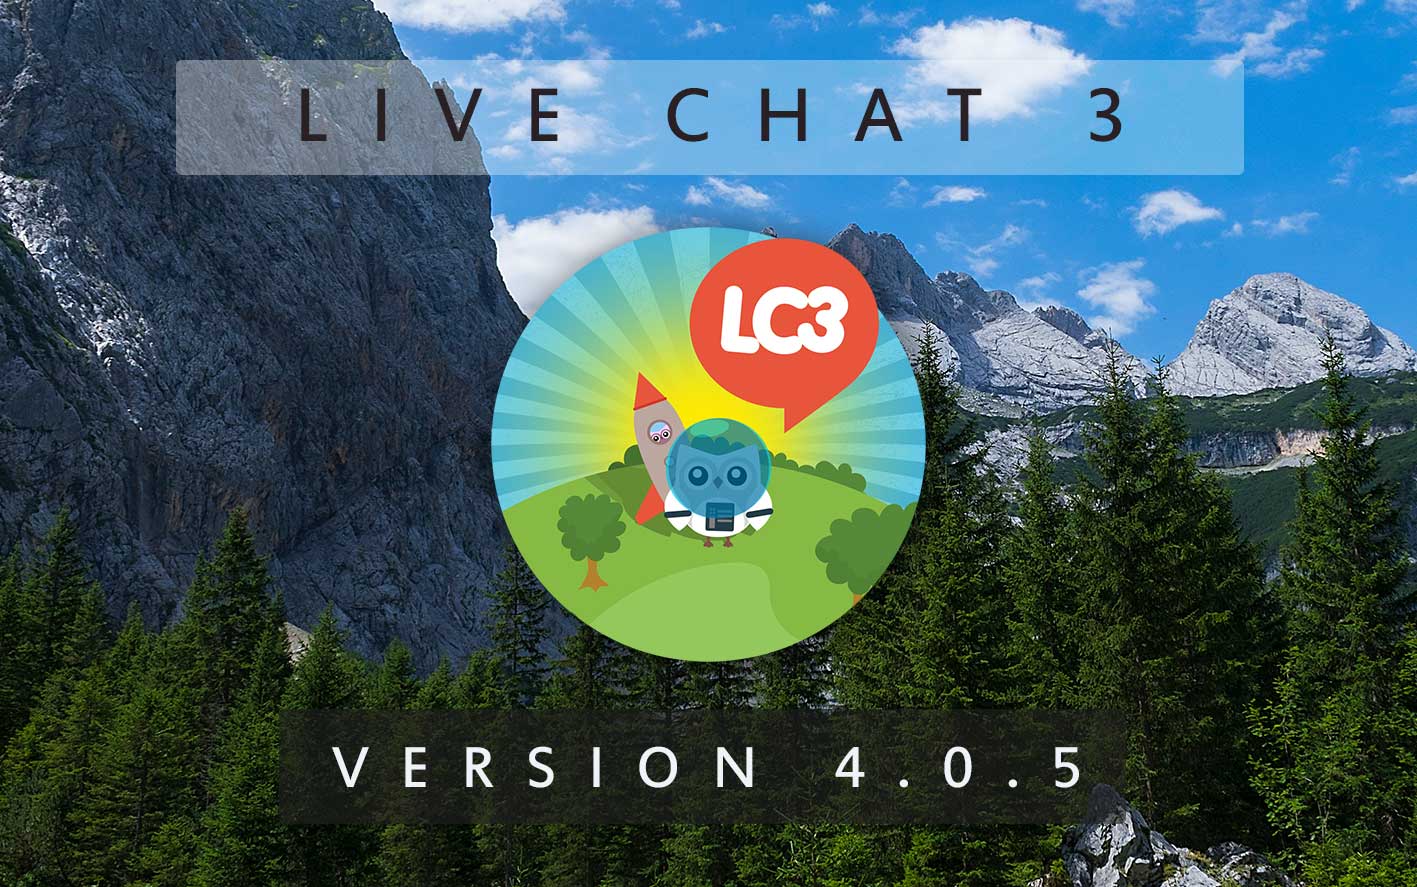 Live Chat 3 - Version 4.0.5